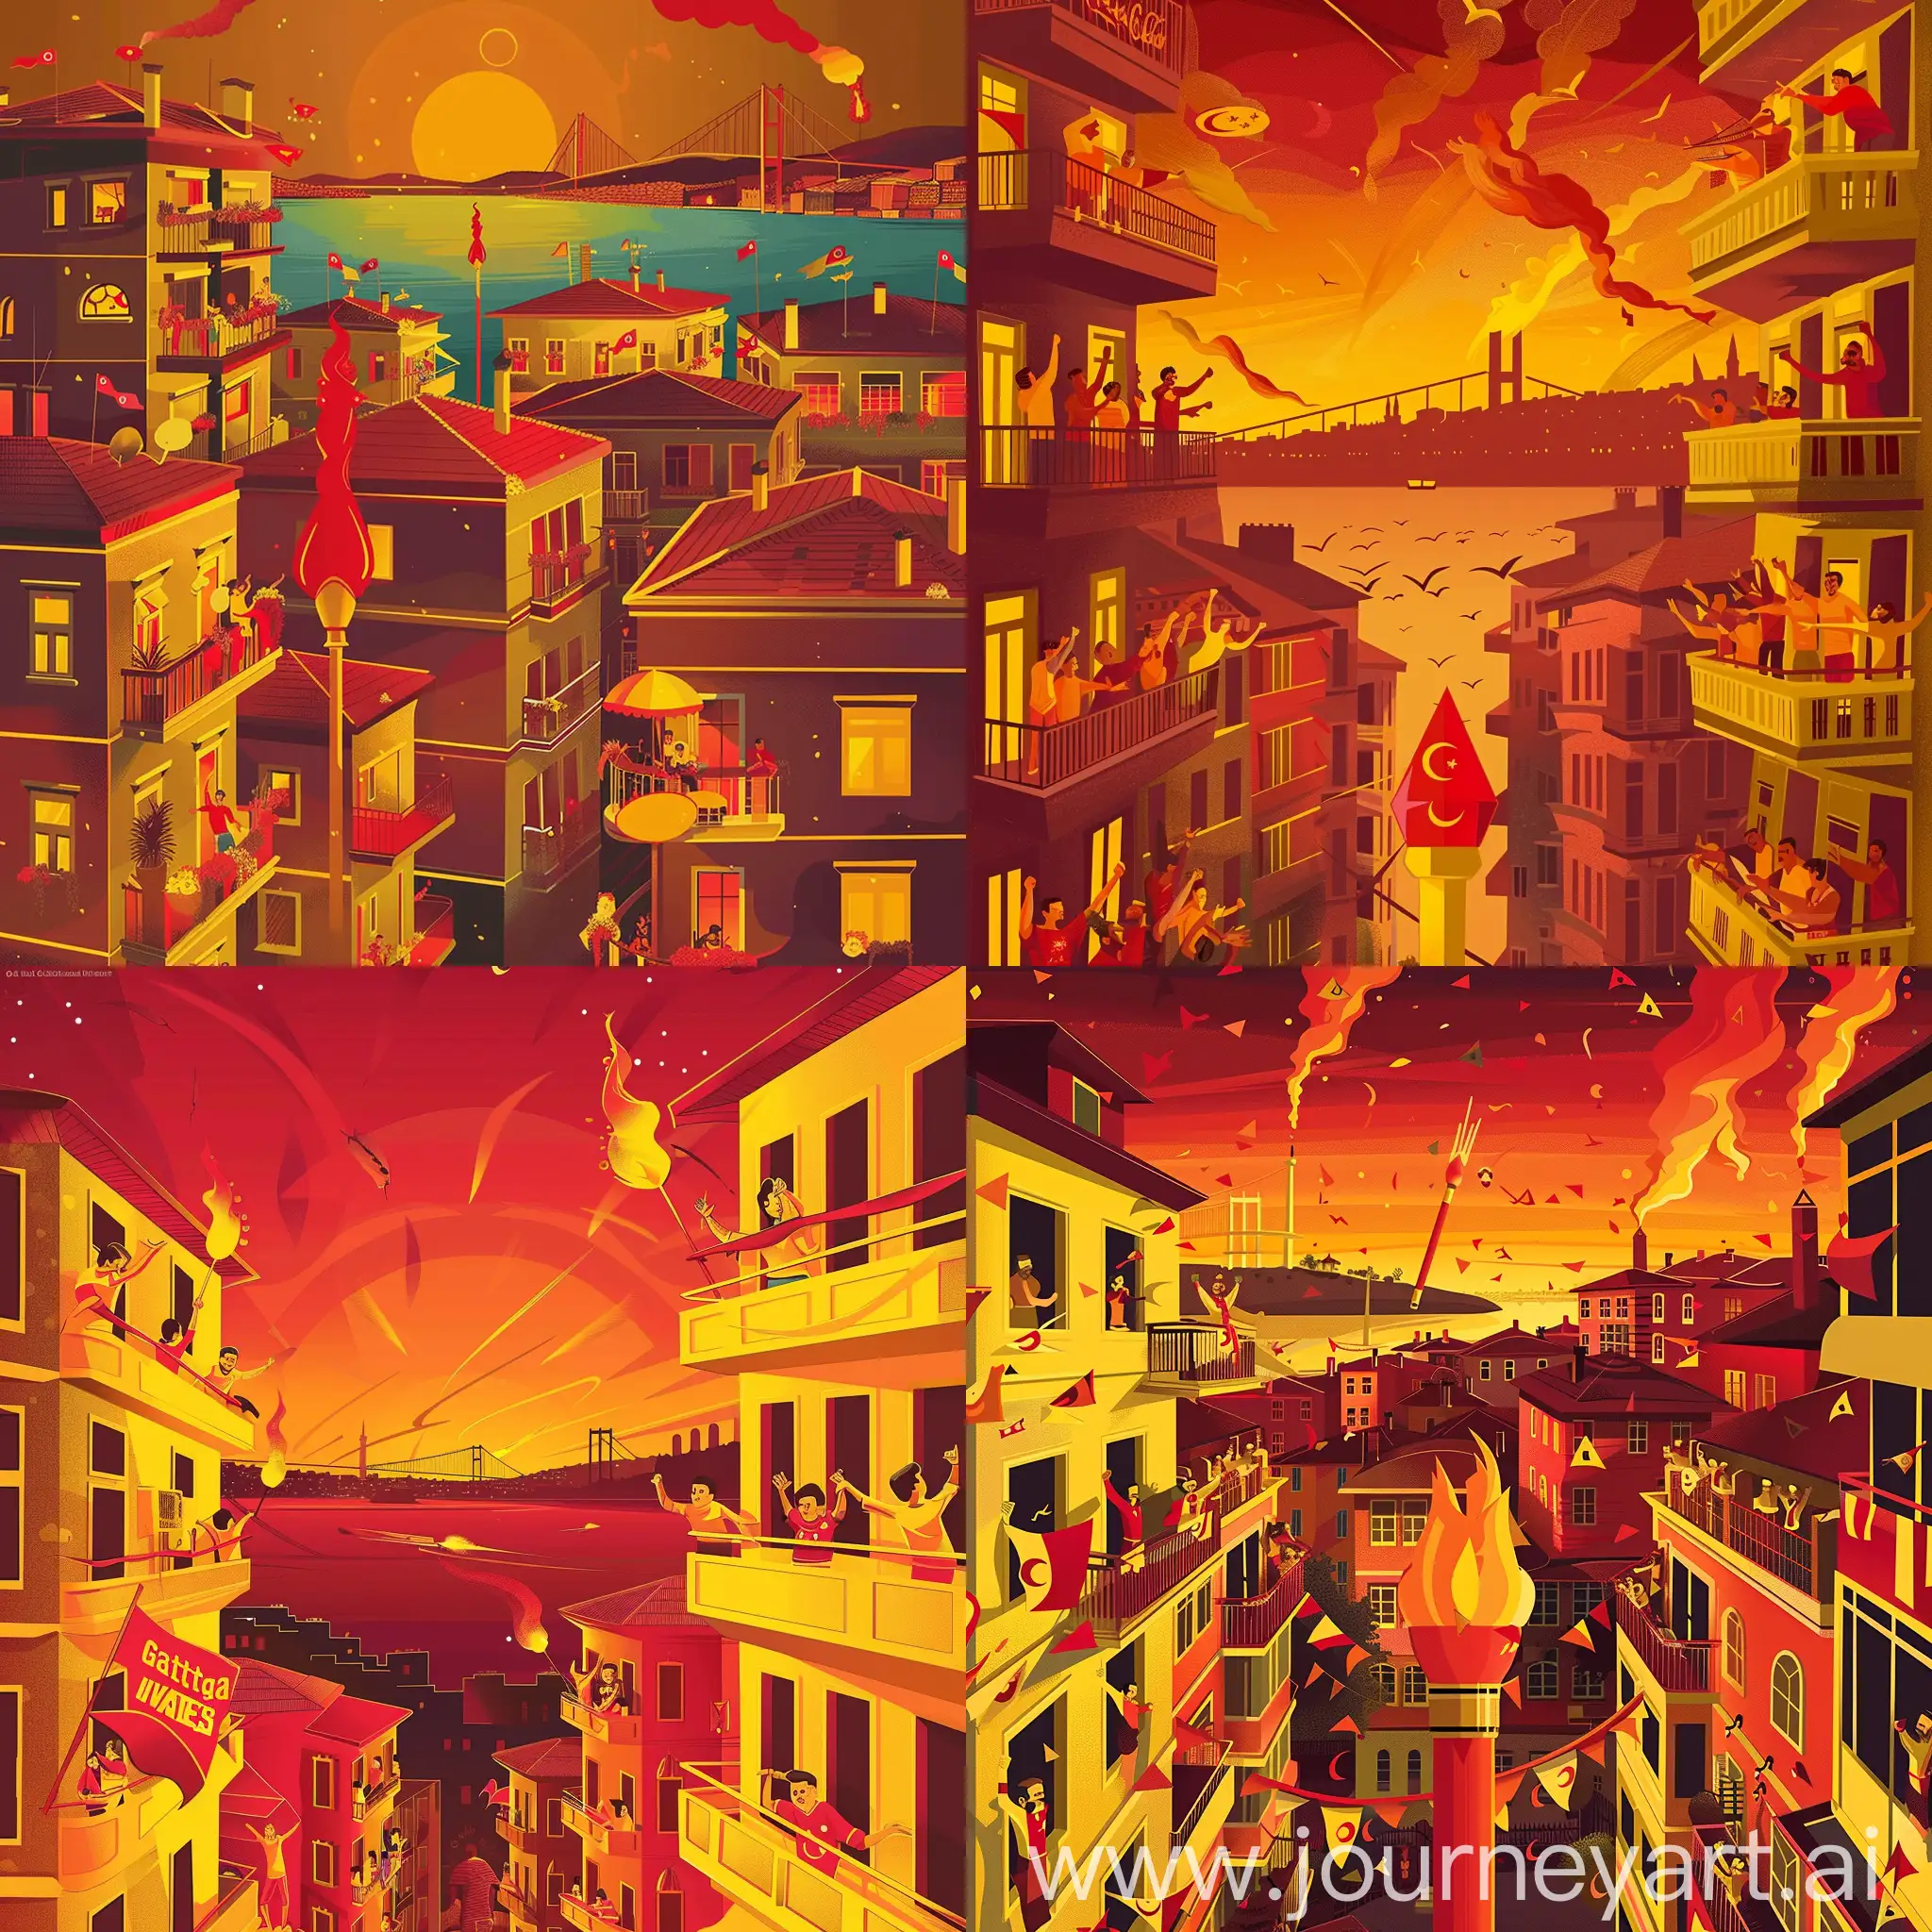 Galatasaray championship poster illustration, Yellow Red predominantly buildings and fans, celebrating from balconies, Bosphorus in the background, Galatasaray fans, yellow torch with red torch, yellow and red colors, orange and red colors night time illustration